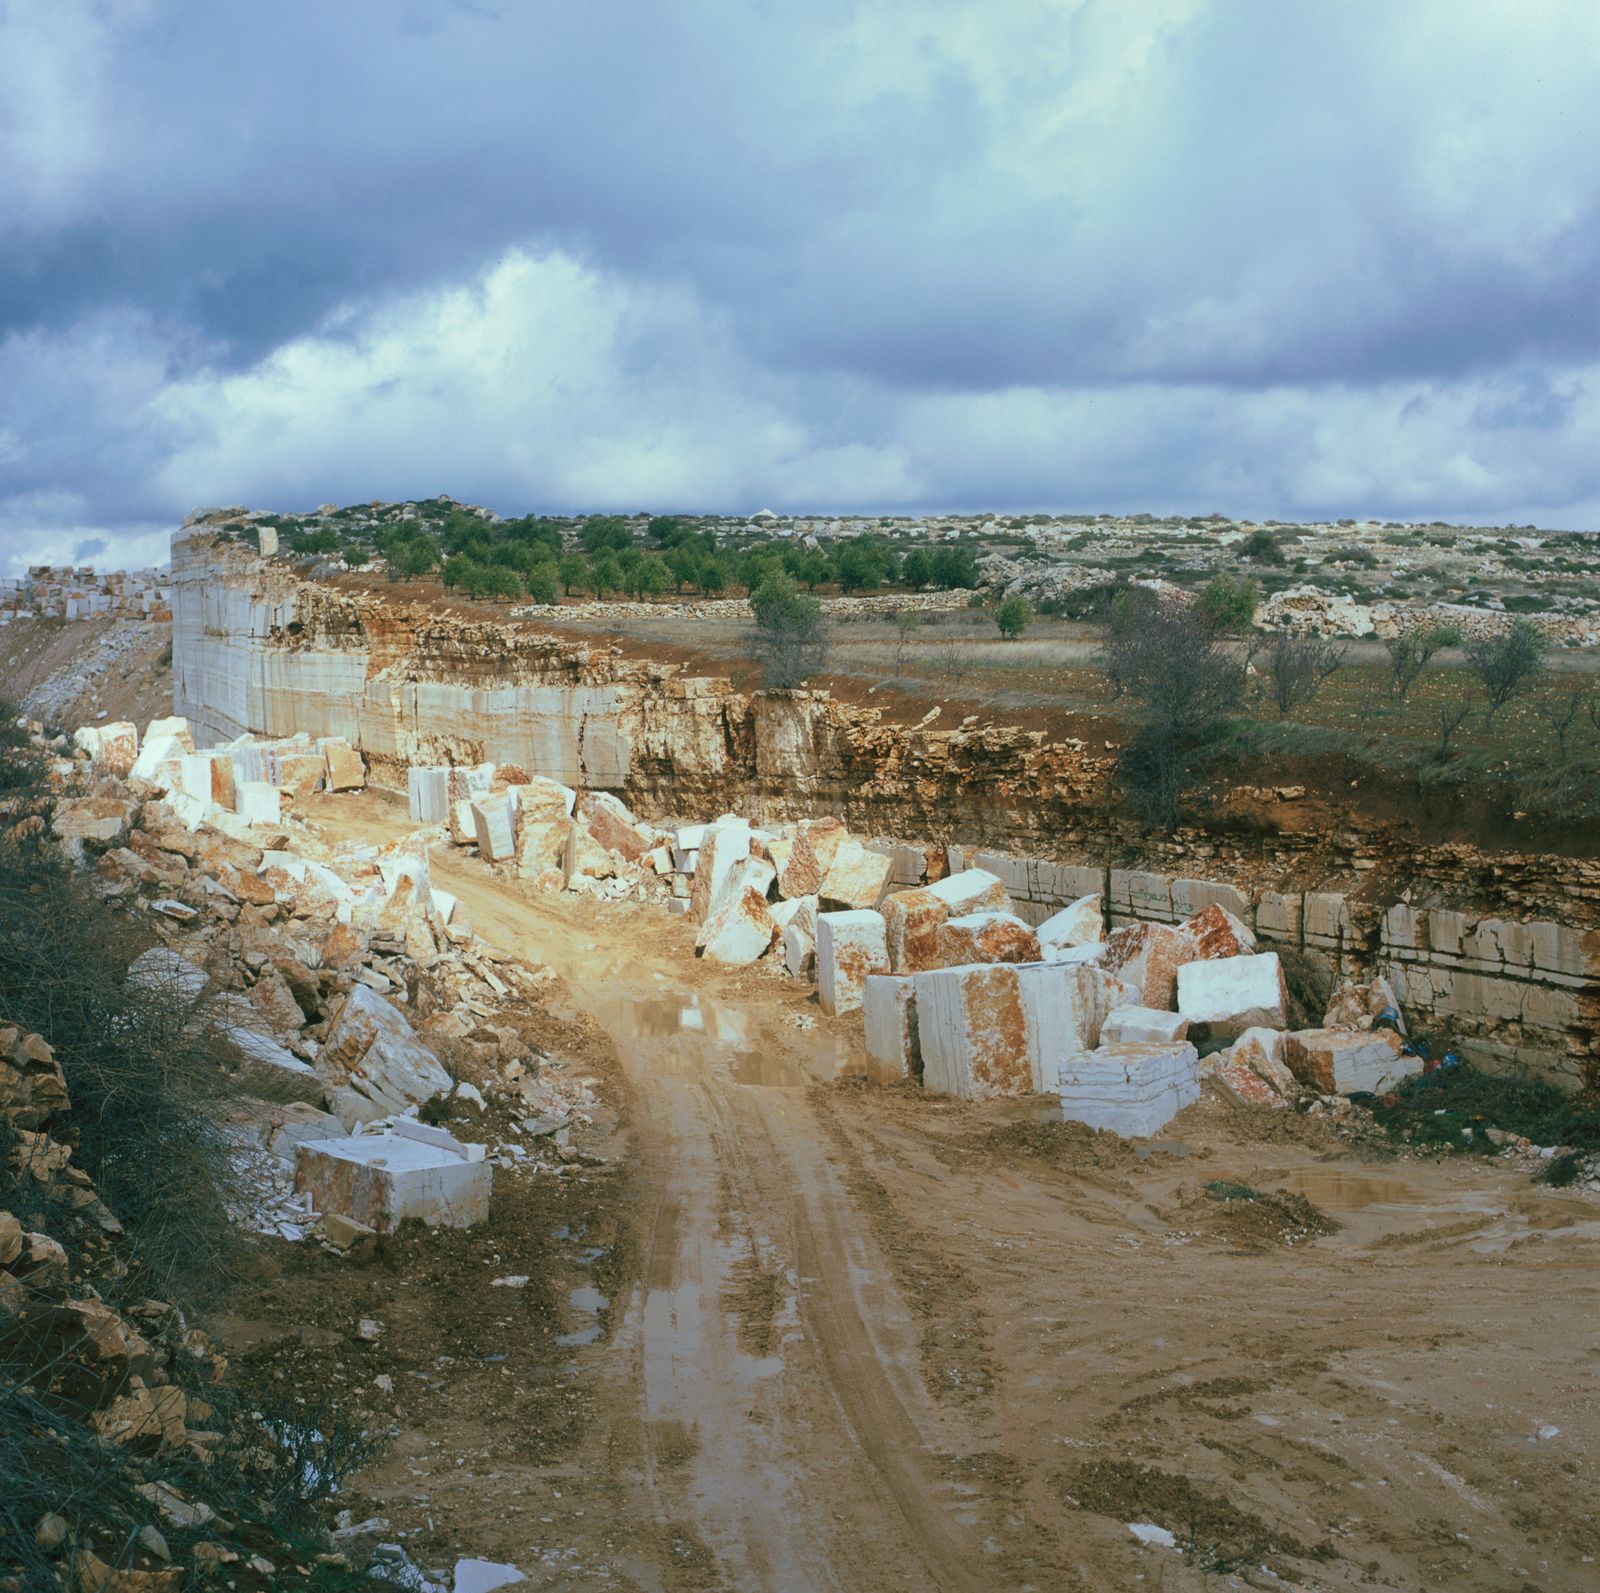 © Federico Busonero - Marble quarry near Hebron showing the severe impact on the cultivated landscape.